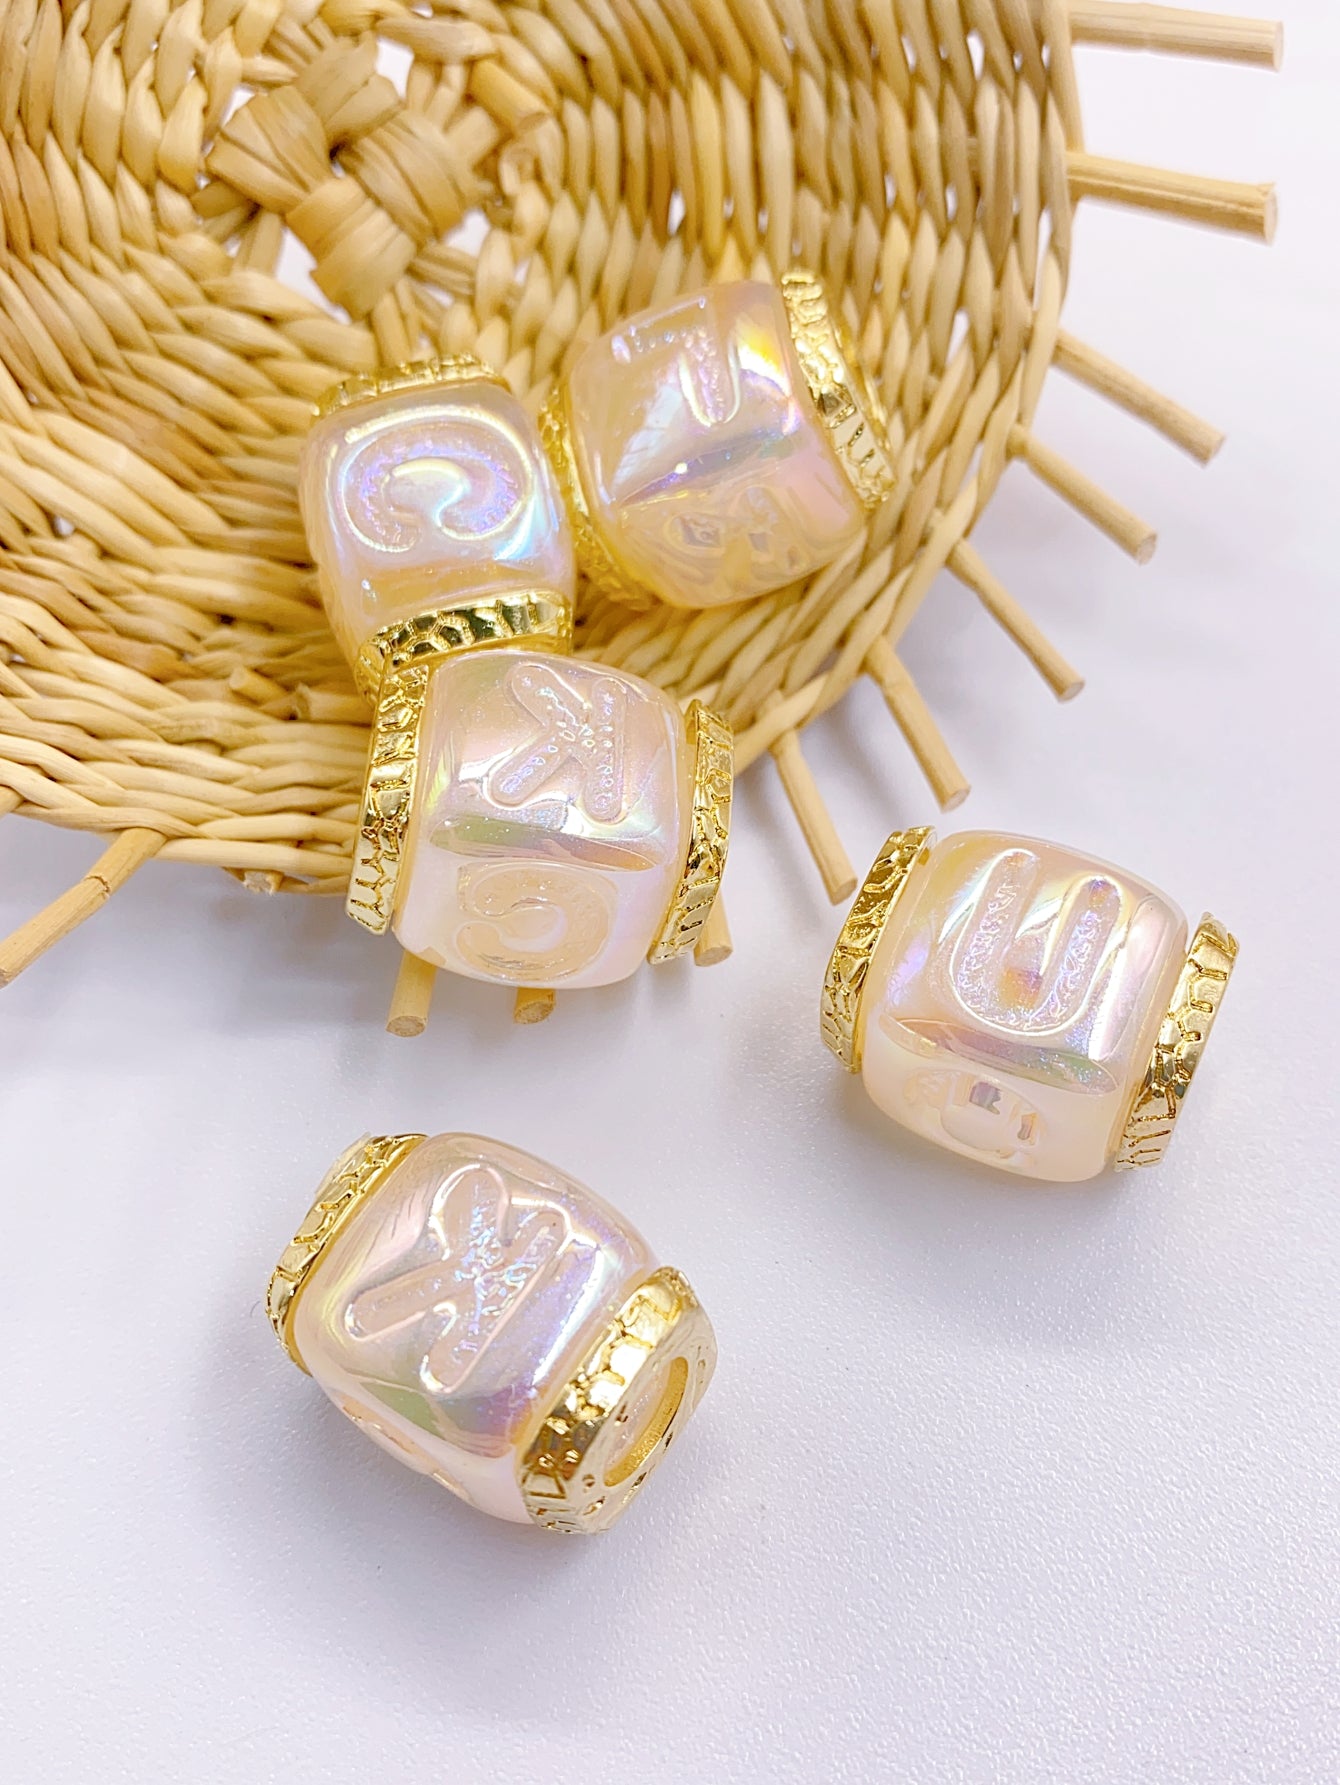 New abs Mermaid bead oblong alloy Star Color Shell small fresh clothing accessories Earrings Pendant diy pearl jewelry